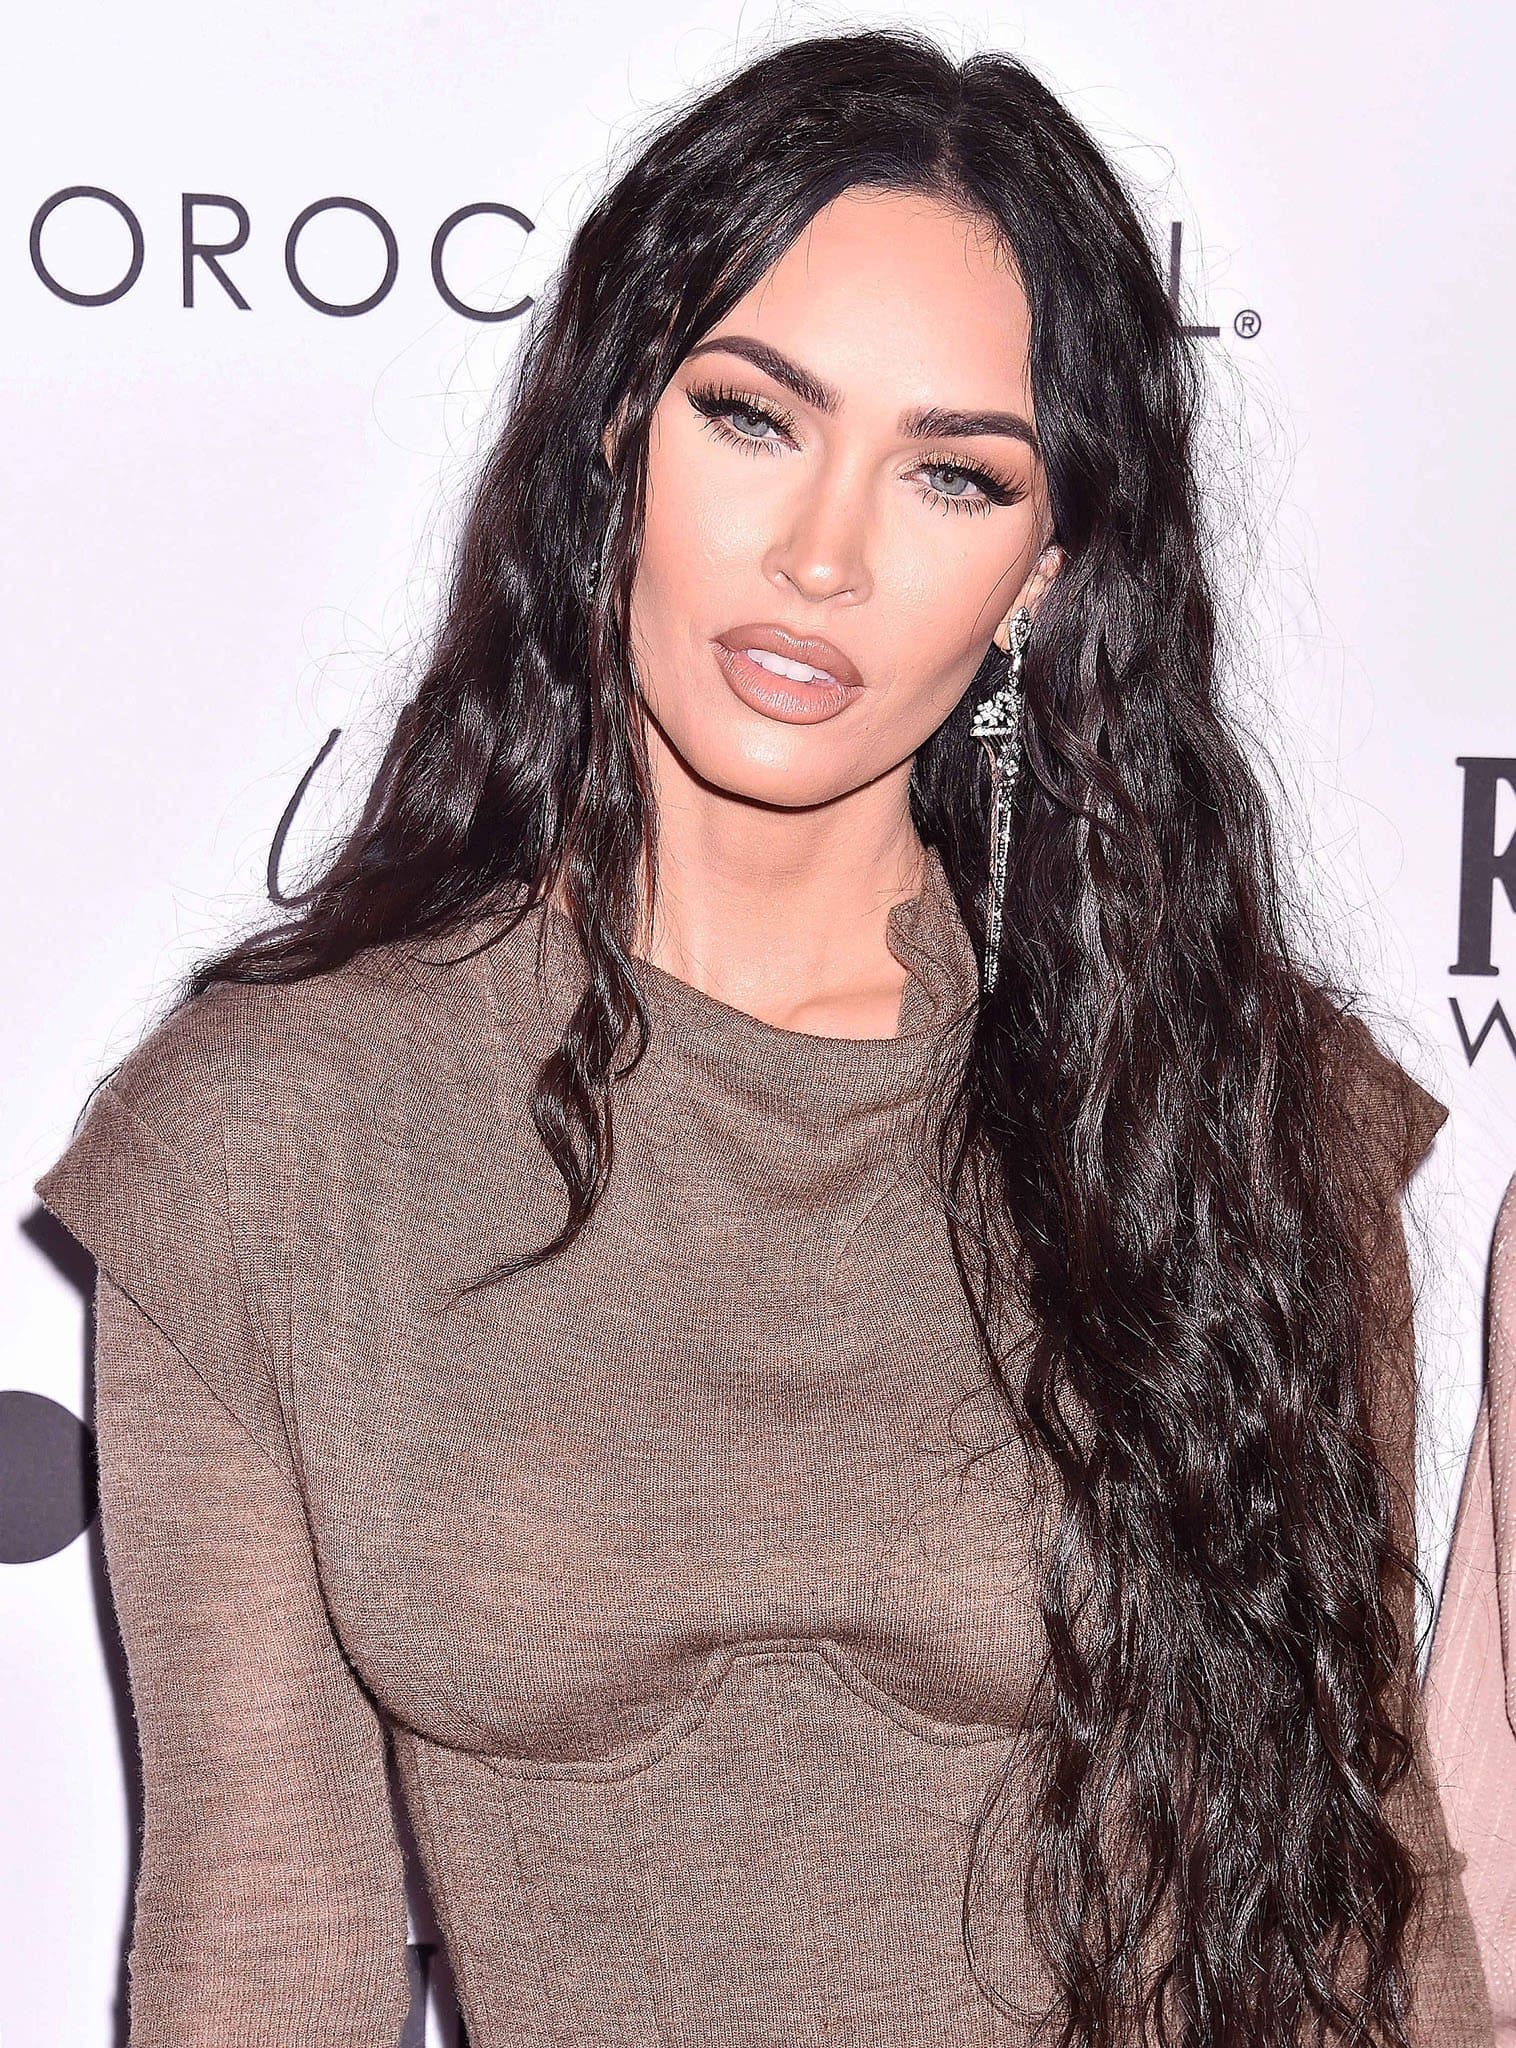 Megan Fox wears her long tresses in thick curls and highlights her features with nude makeup